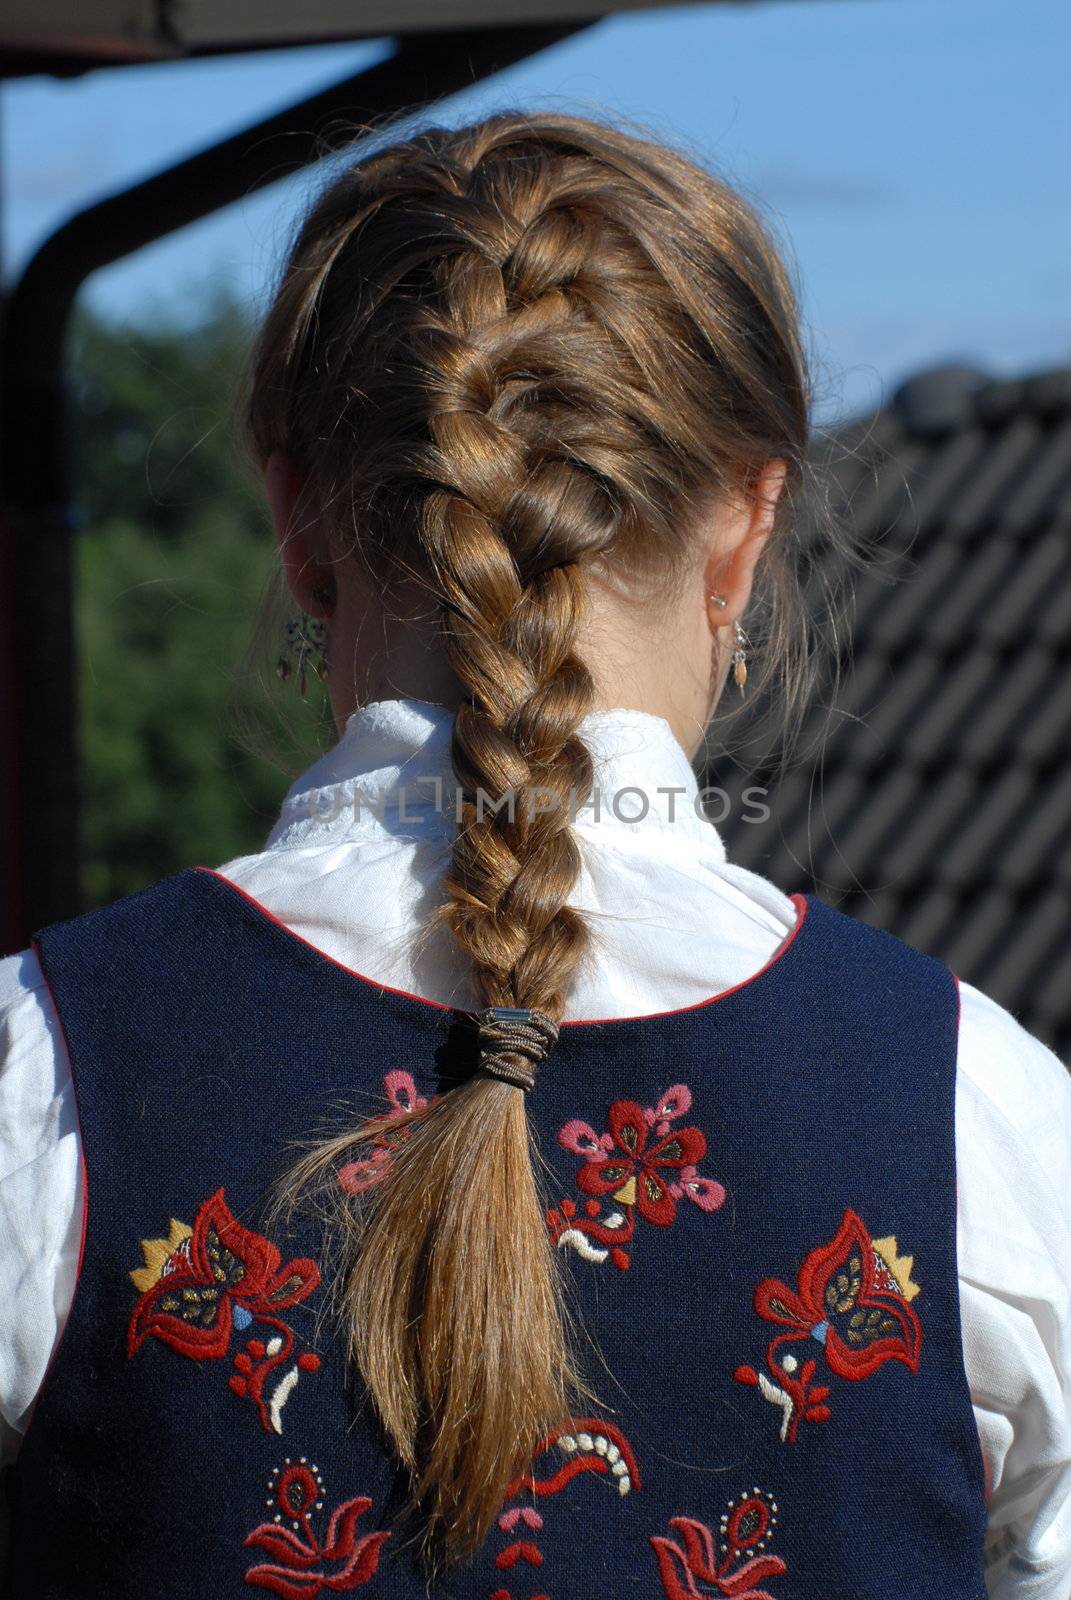 Girl with braid